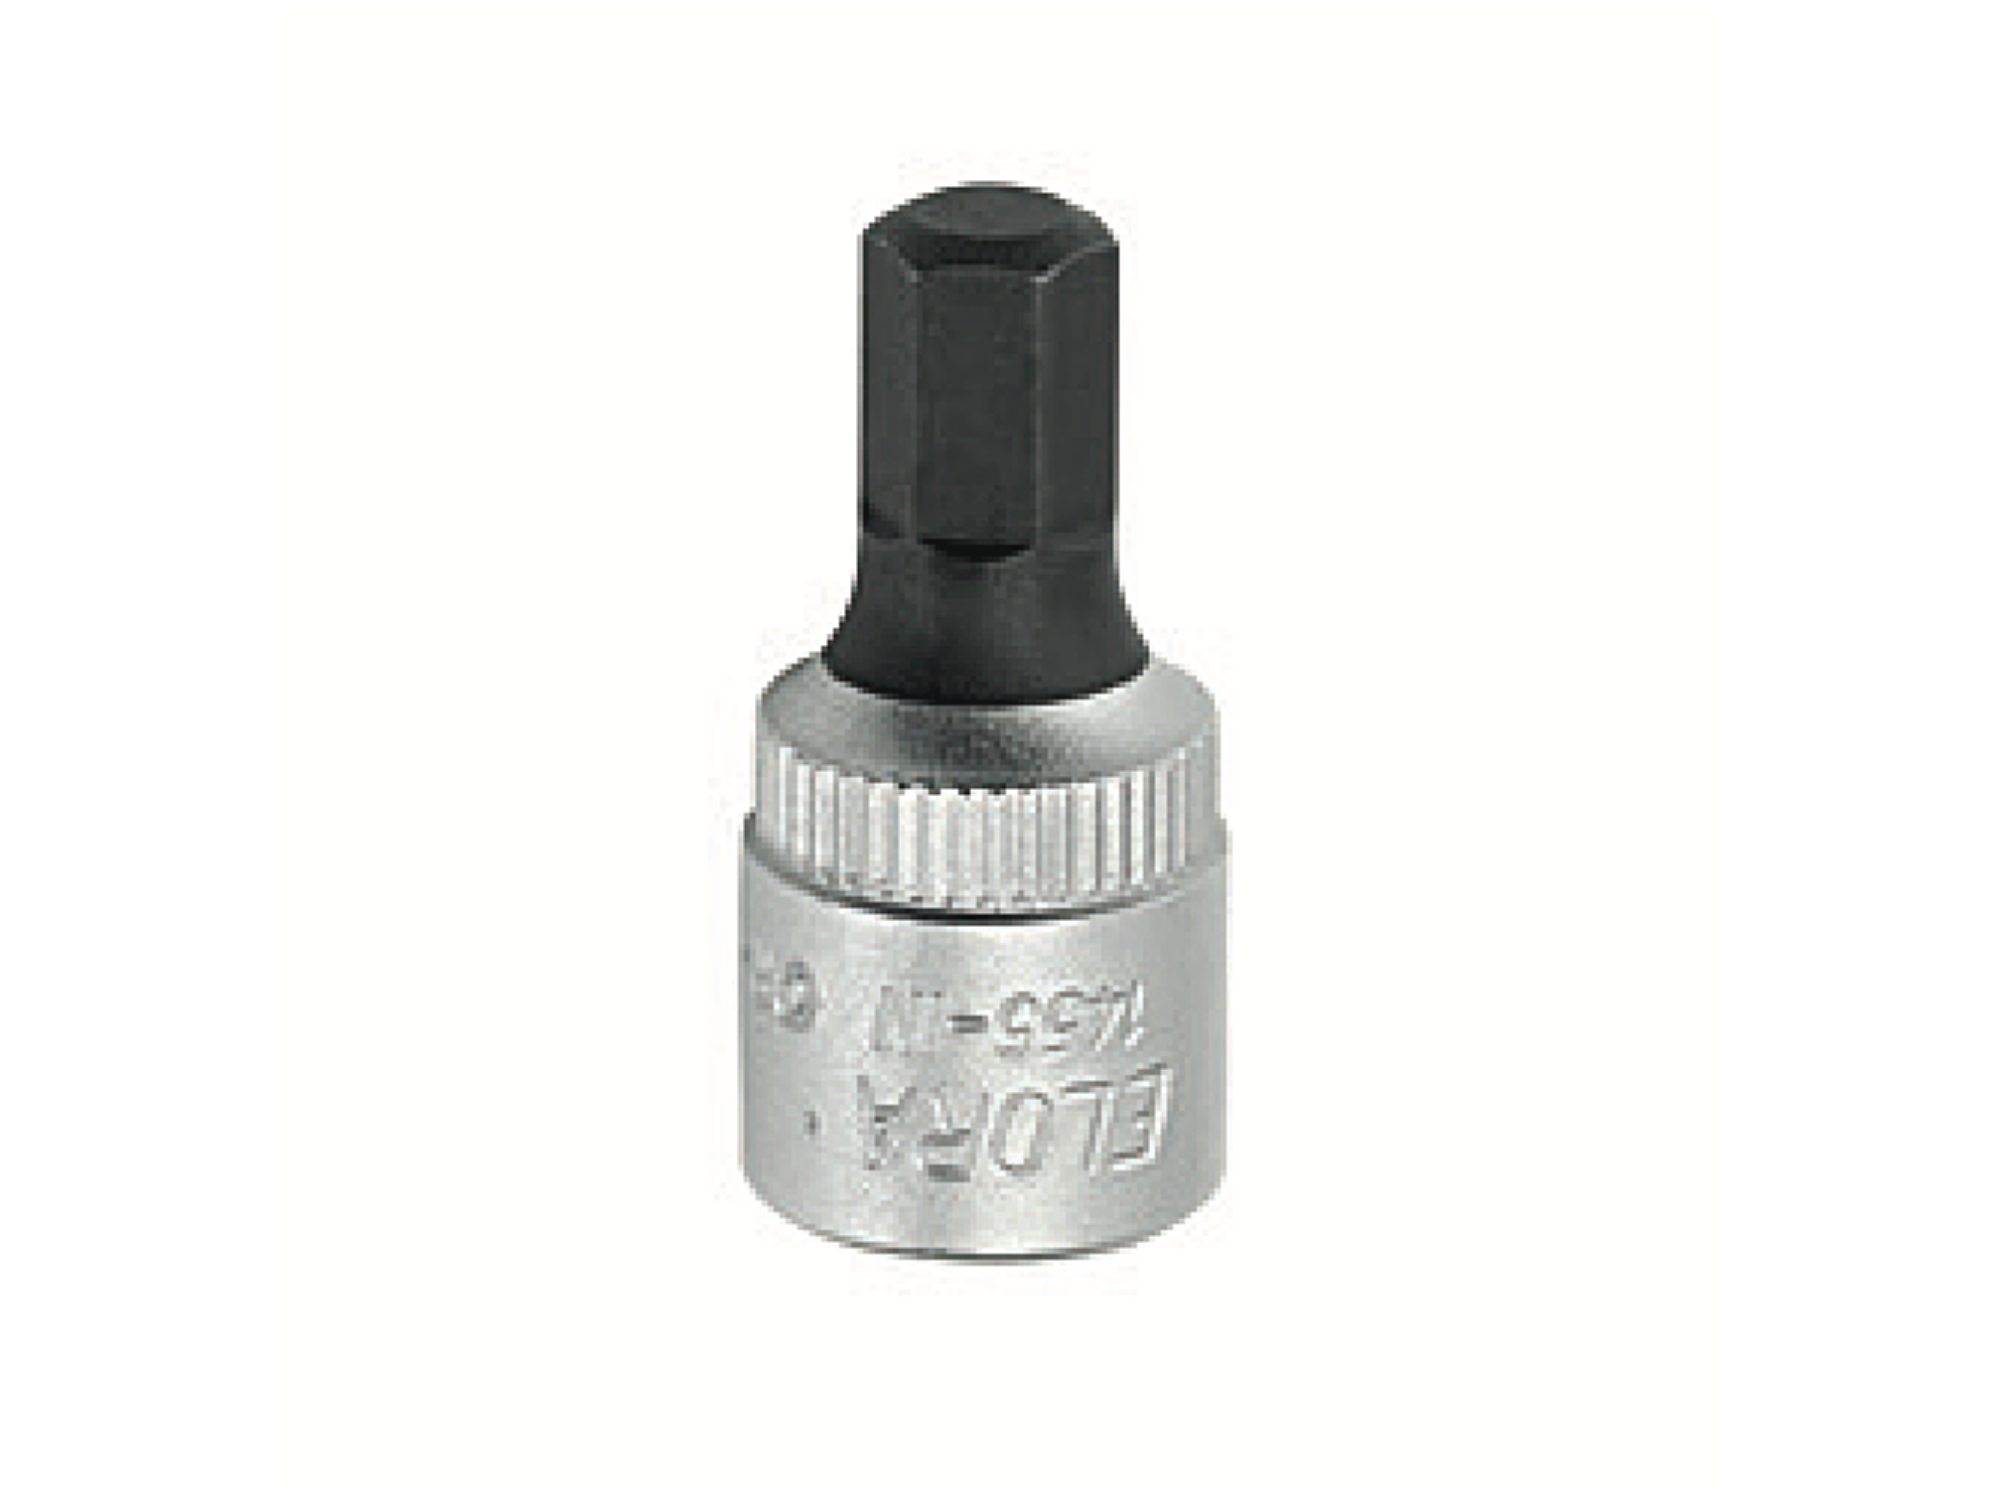 ELORA 1455-INA 1/4" Screwdriver Socket Inches (ELORA Tools) - Premium 1/4" Screwdriver Socket Inches from ELORA - Shop now at Yew Aik.